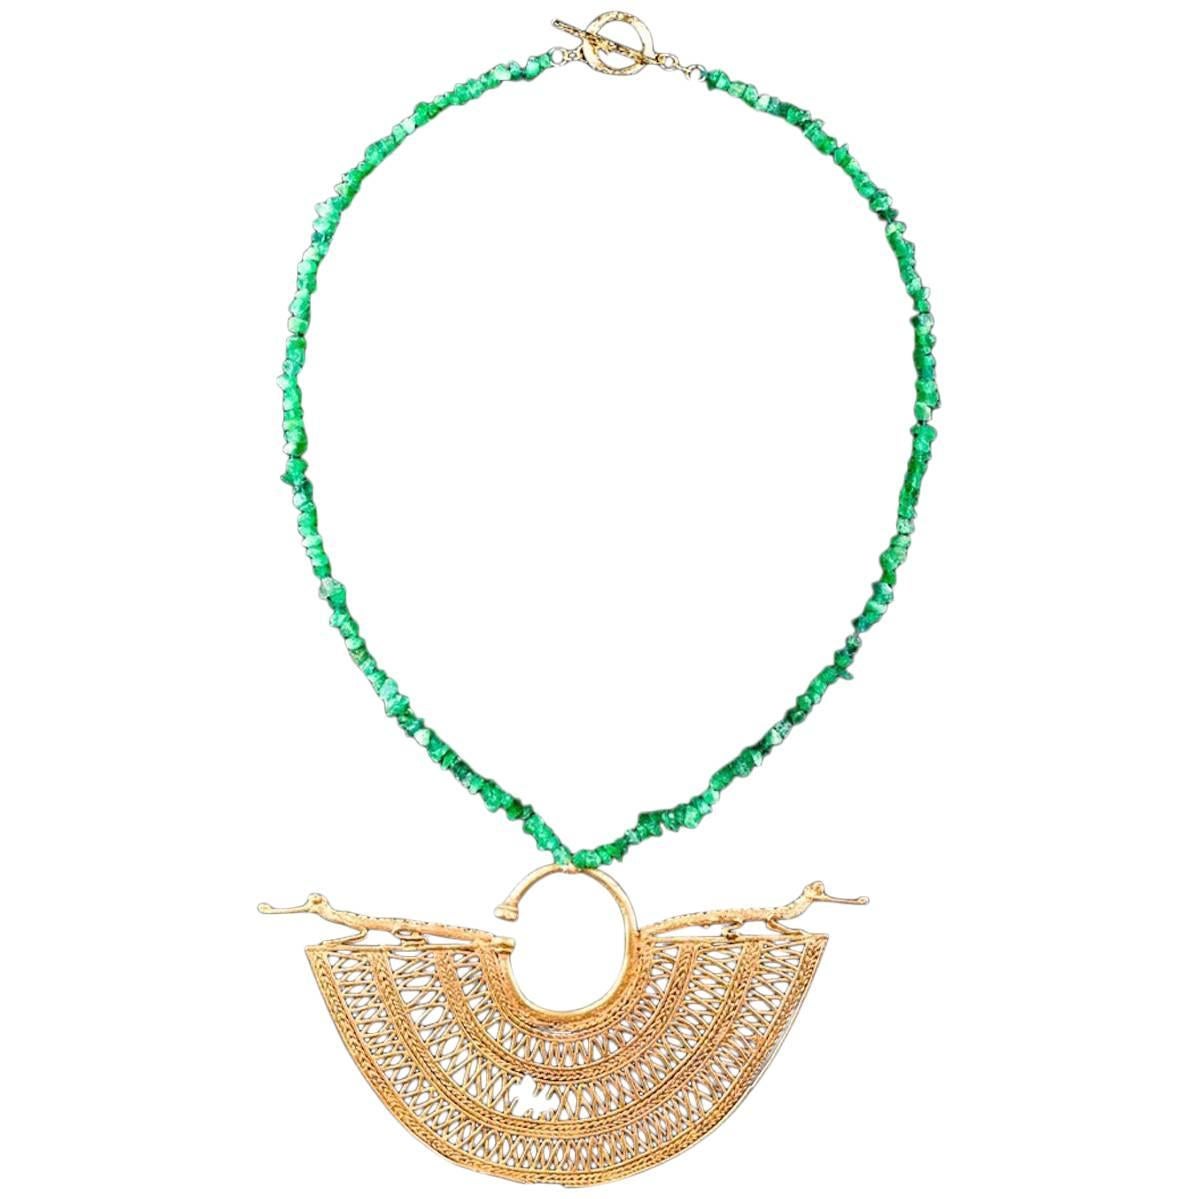 Emerald Chip Necklace with a False Filigree Earring with Caymans For Sale